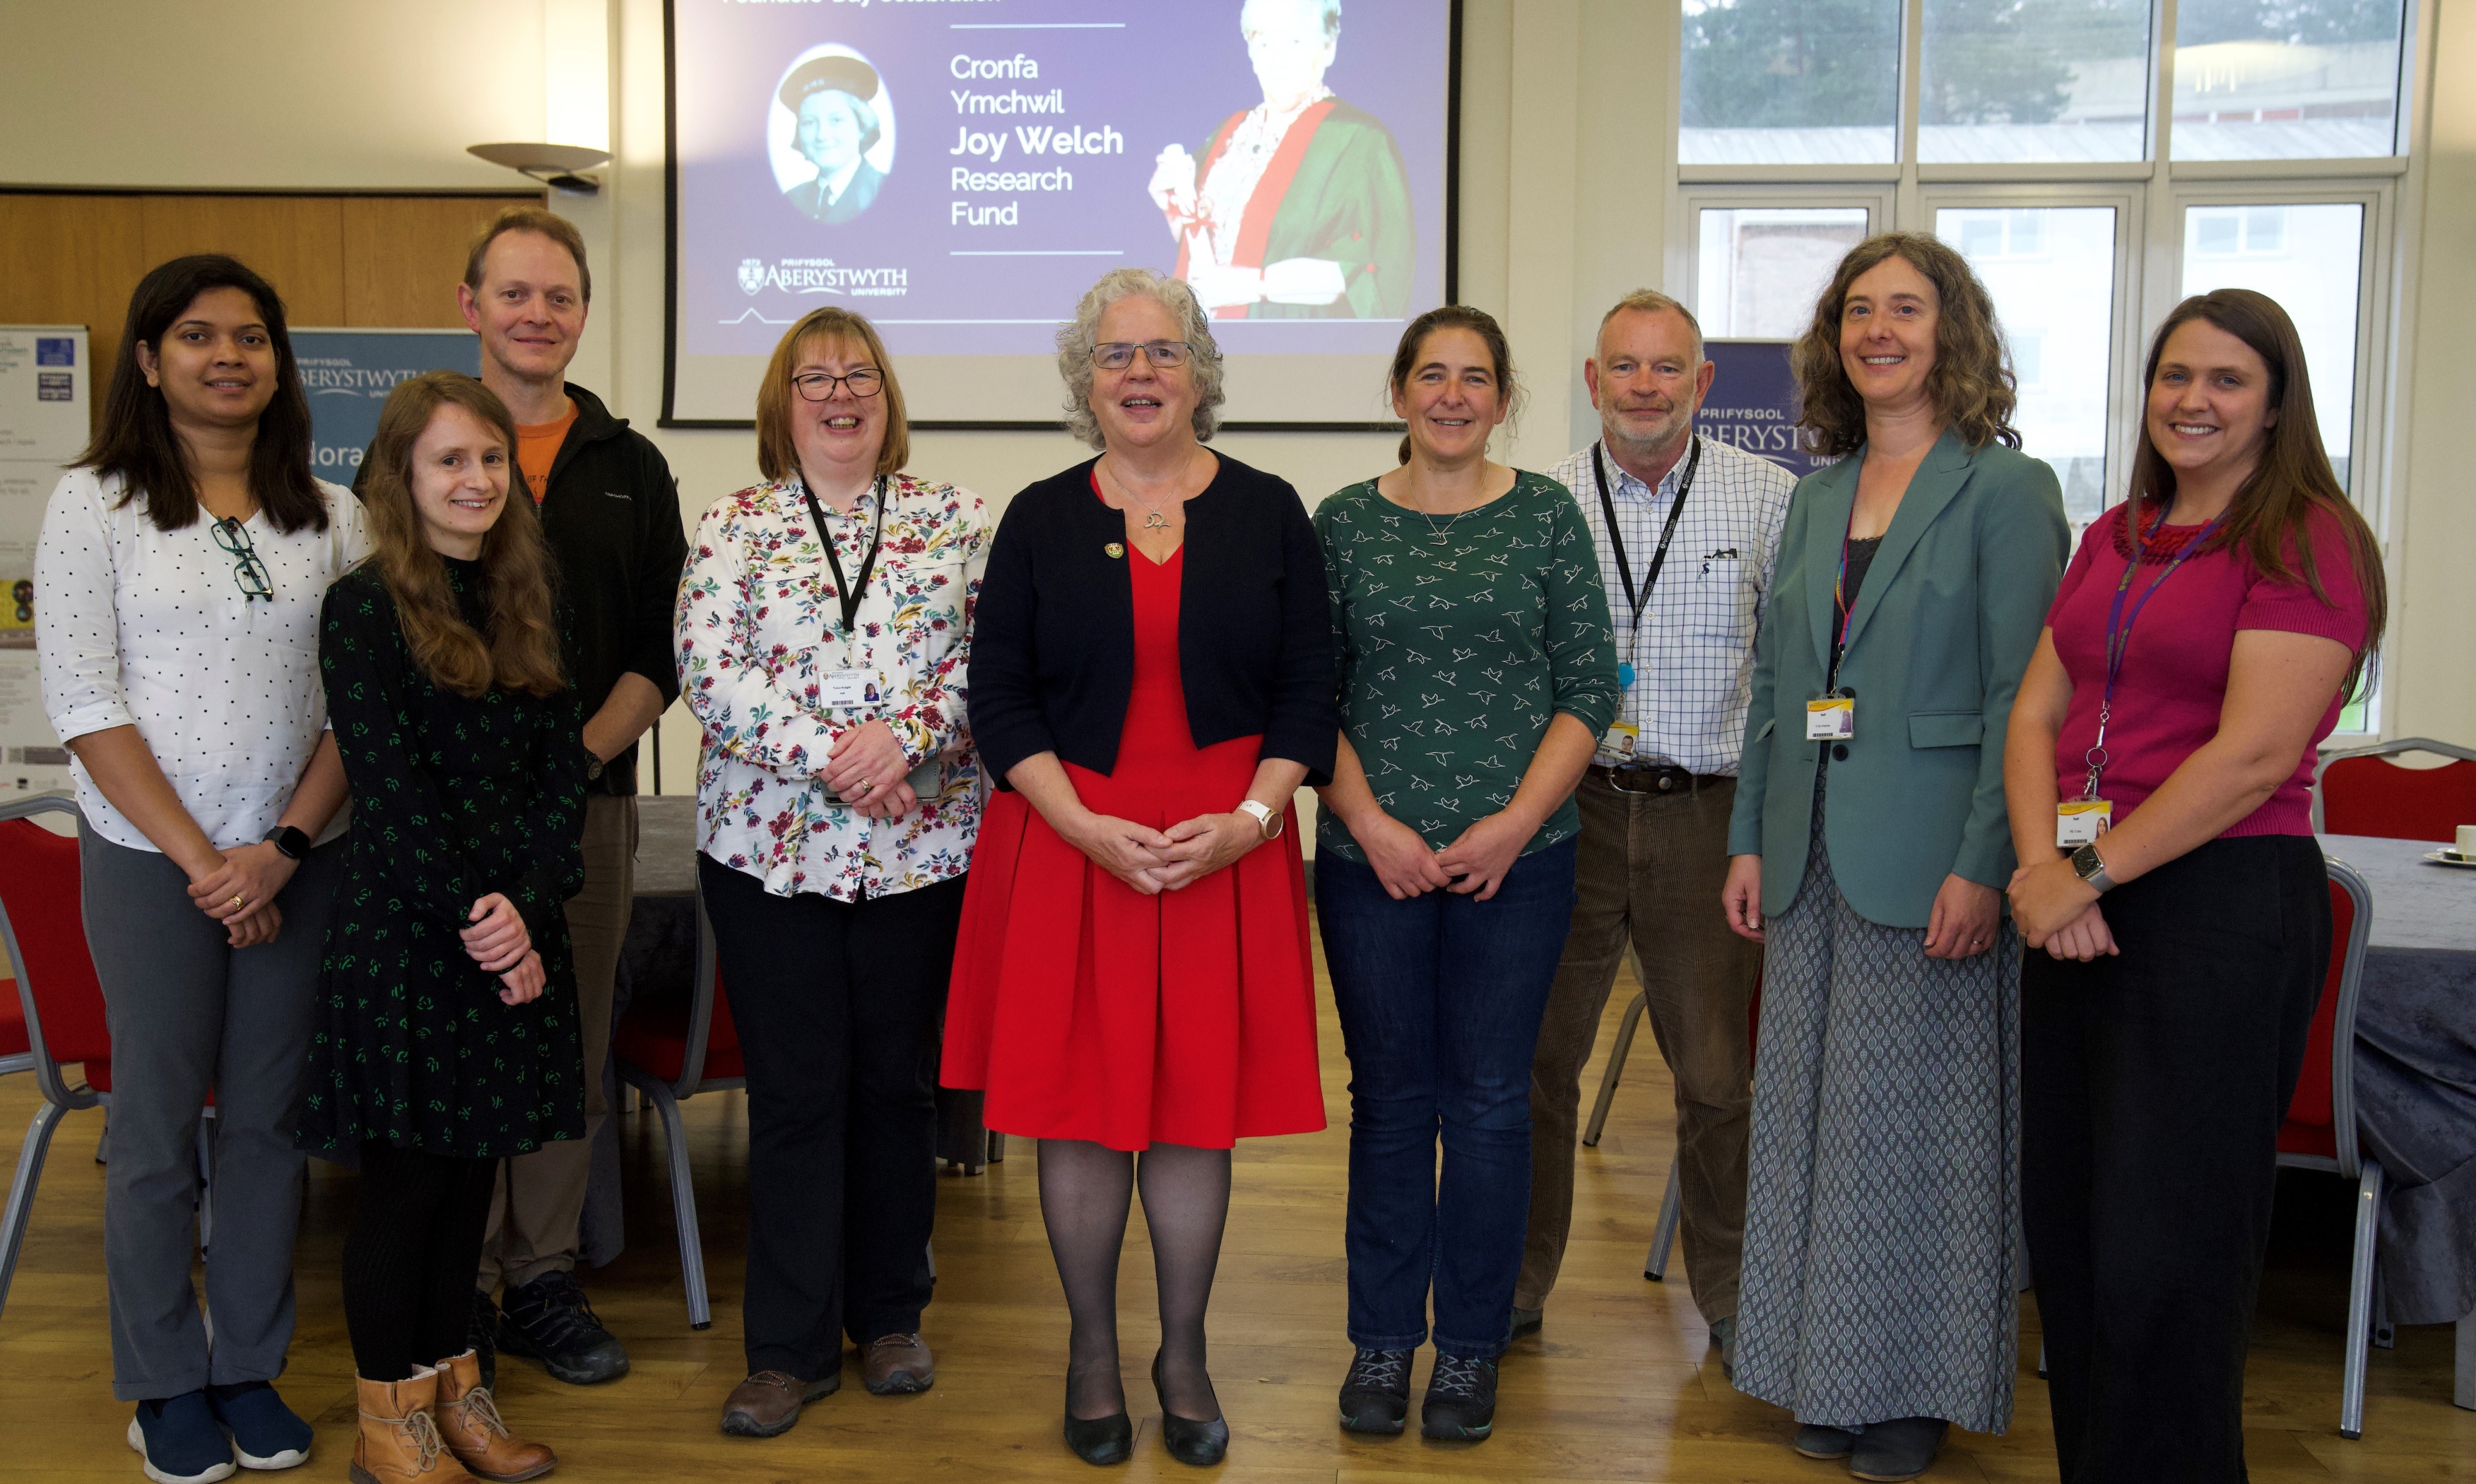 Vice-Chancellor Professor Elizabeth Treasure (centre) and Dr Eva De Visscher, Trusts and Foundations Manager at Aberystwyth University (second right) mark the new Joy Welch endowment with researchers who have received support from the Trust (left to right) Dr Valerie Rodrigues (Life Sciences), Dr Alice Vernon (English and Creative Writing), Professor Stephen Tooth (Geography and Earth Sciences), Tracy Knight, Dr Sarah Dalesman and Dr Rhys Thatcher (Life Sciences), and Dr Rachel Cross (Physics).